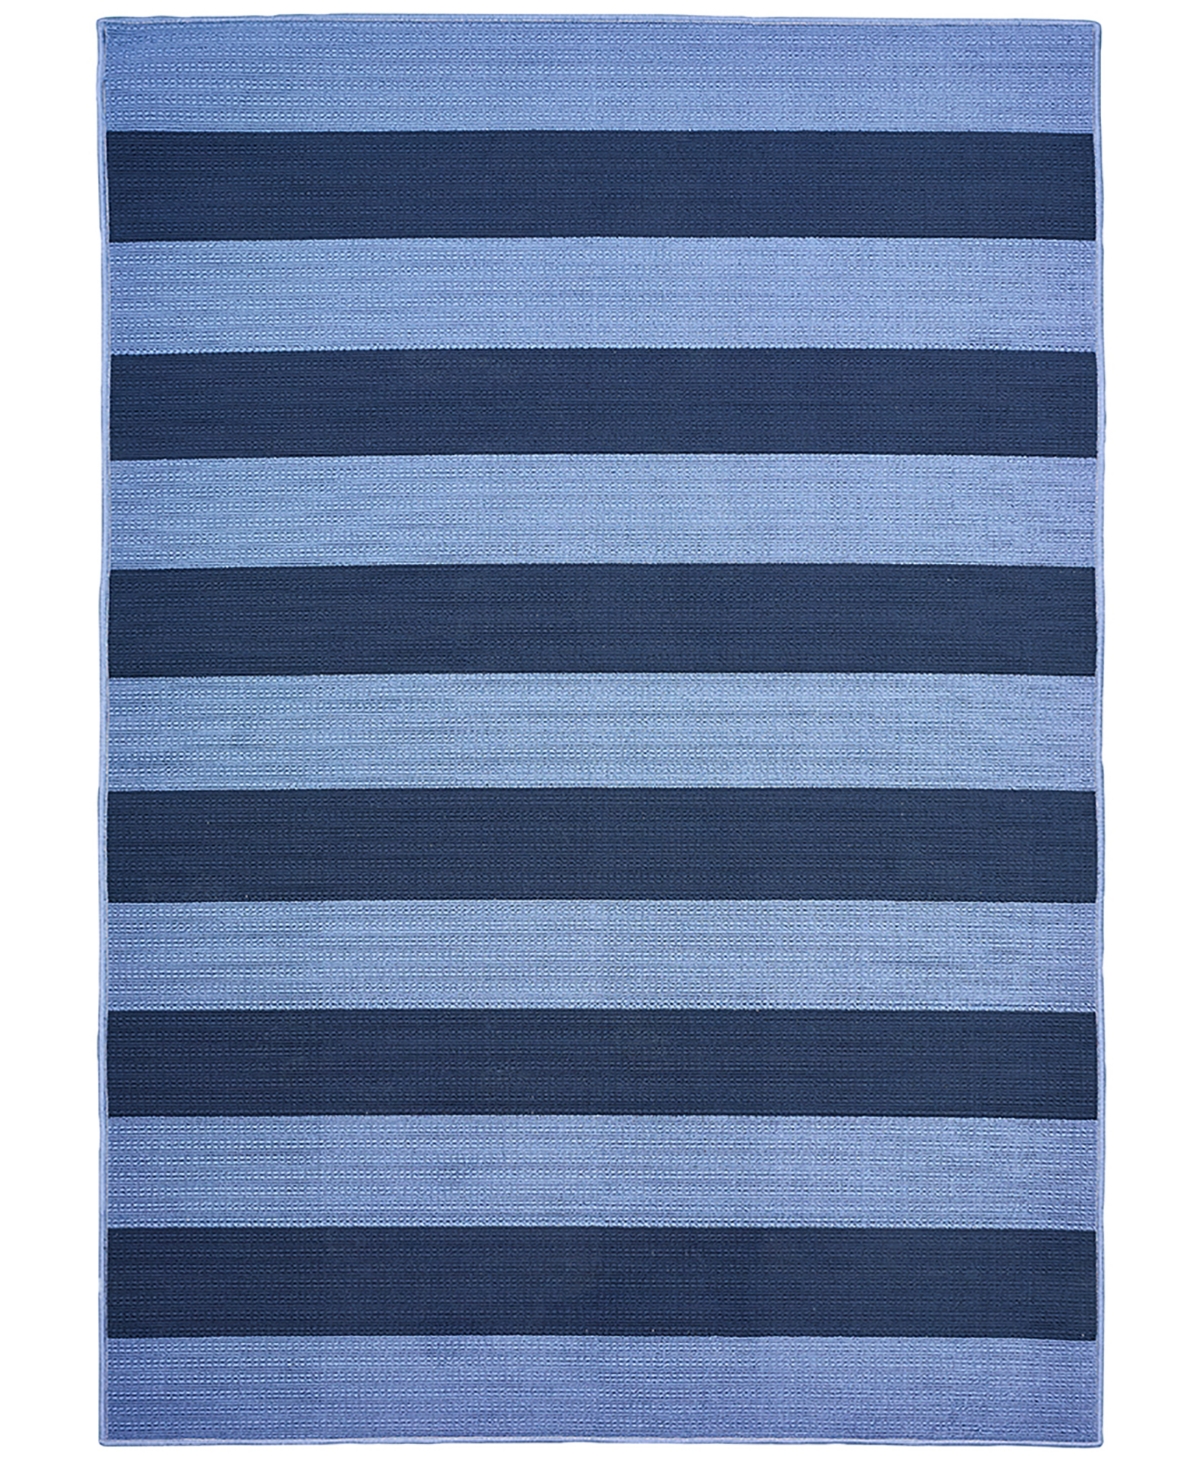 Northern Weavers Vera Awning Stripe 7'10" X 9'10" Area Rug In Blue,navy